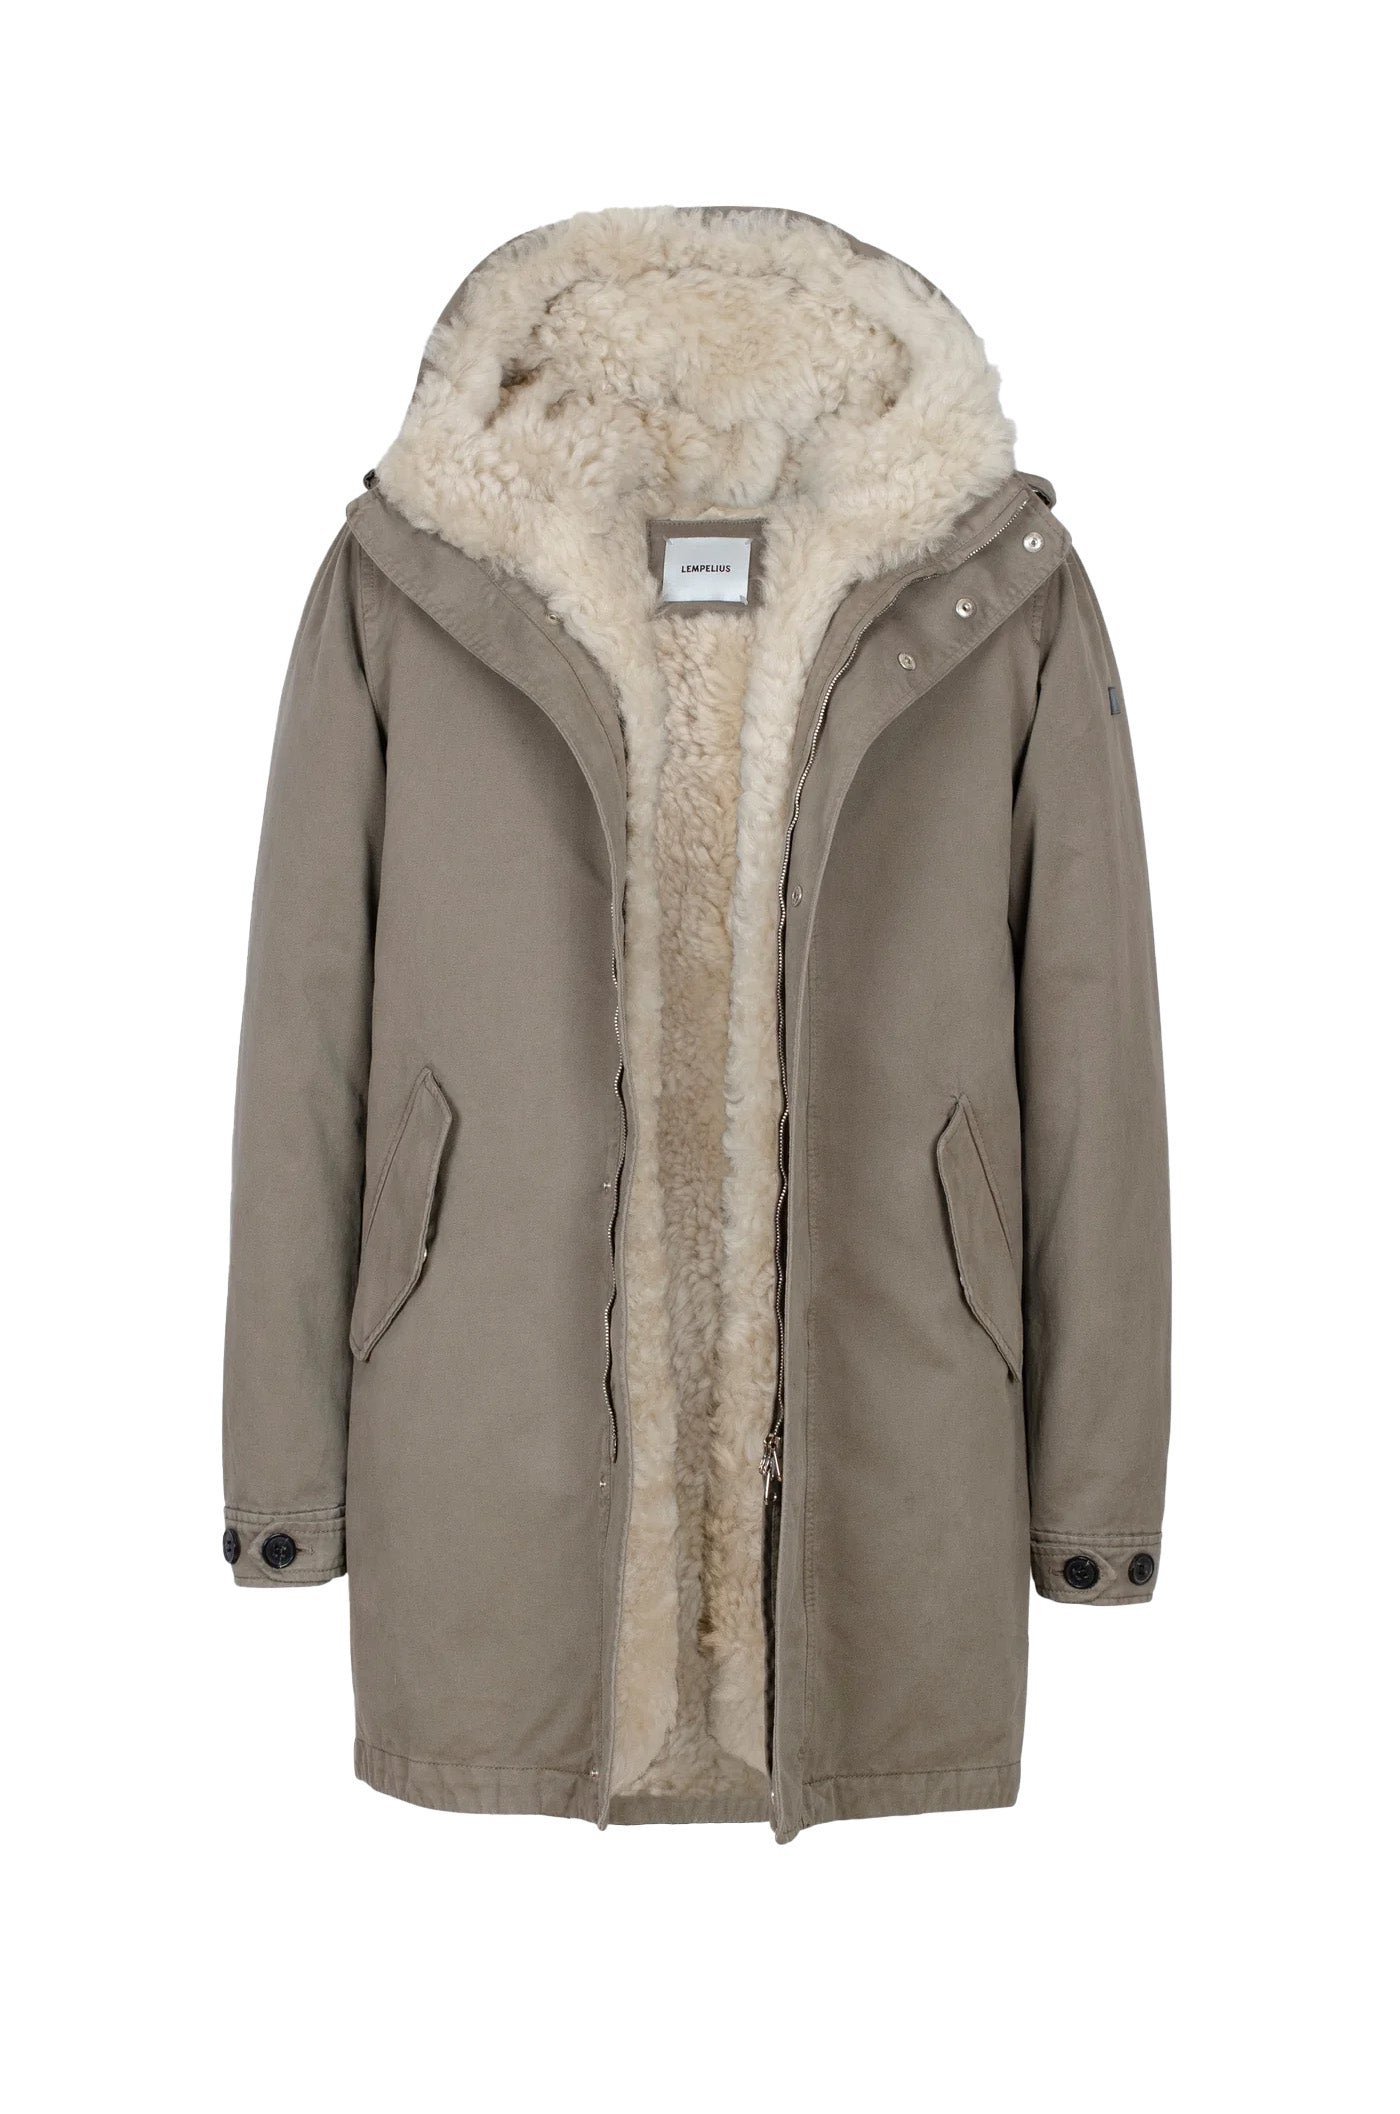 shearling Lempelius cotton Parka in light olive